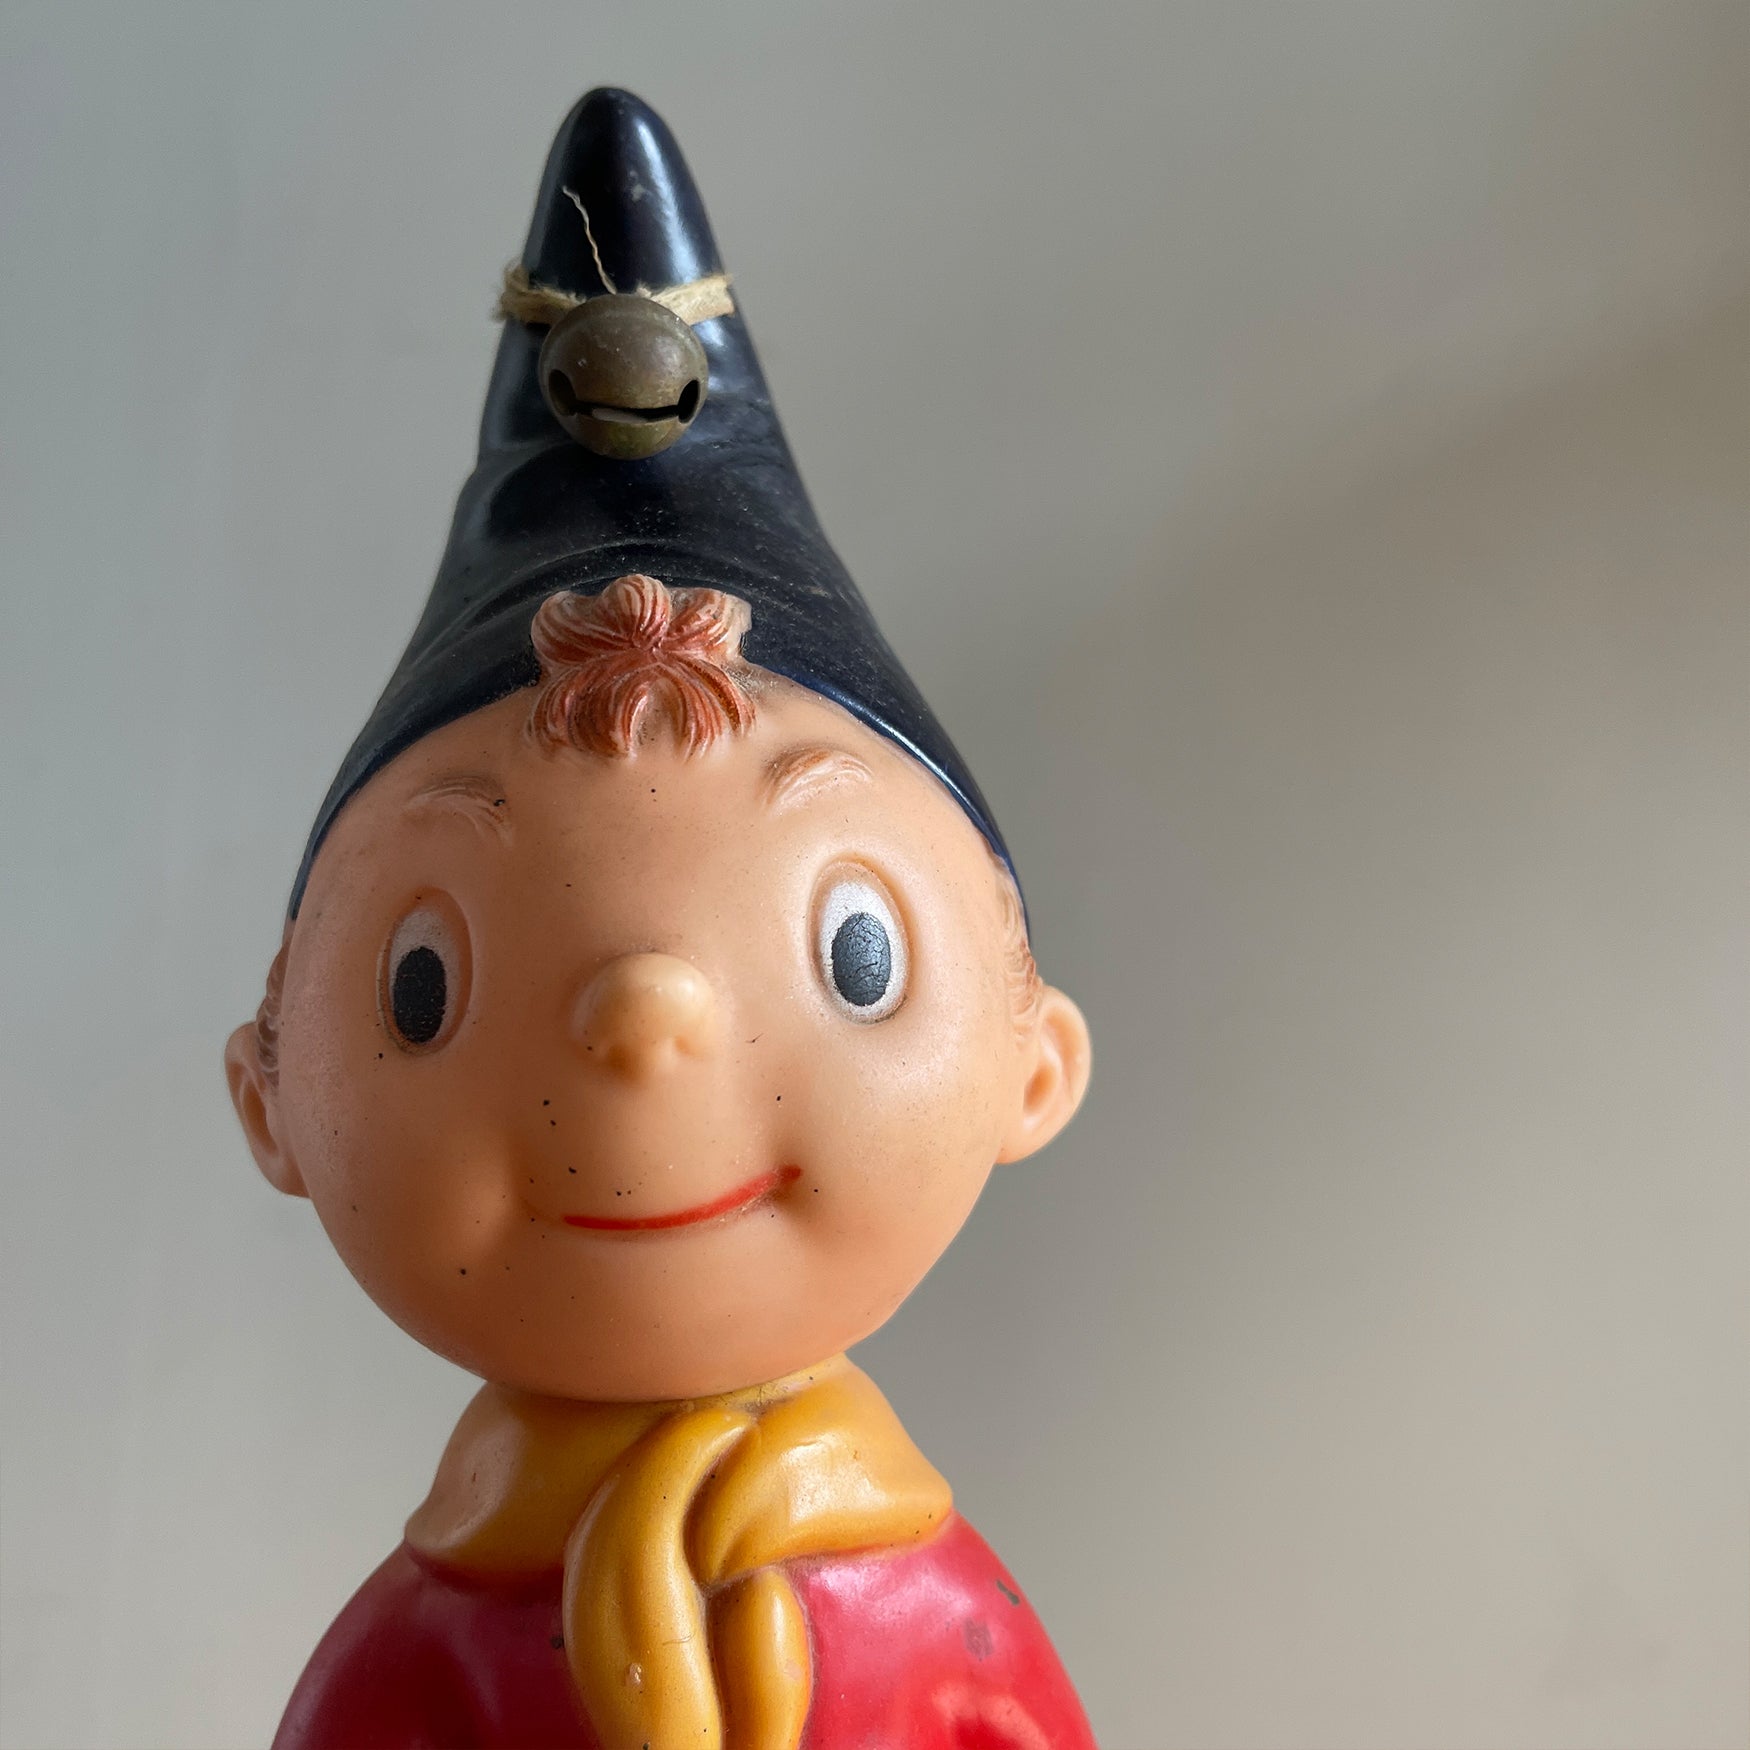 A Vintage 1960s Noddy with brass bell - SHOP NOW - www.intovintage.co.uk